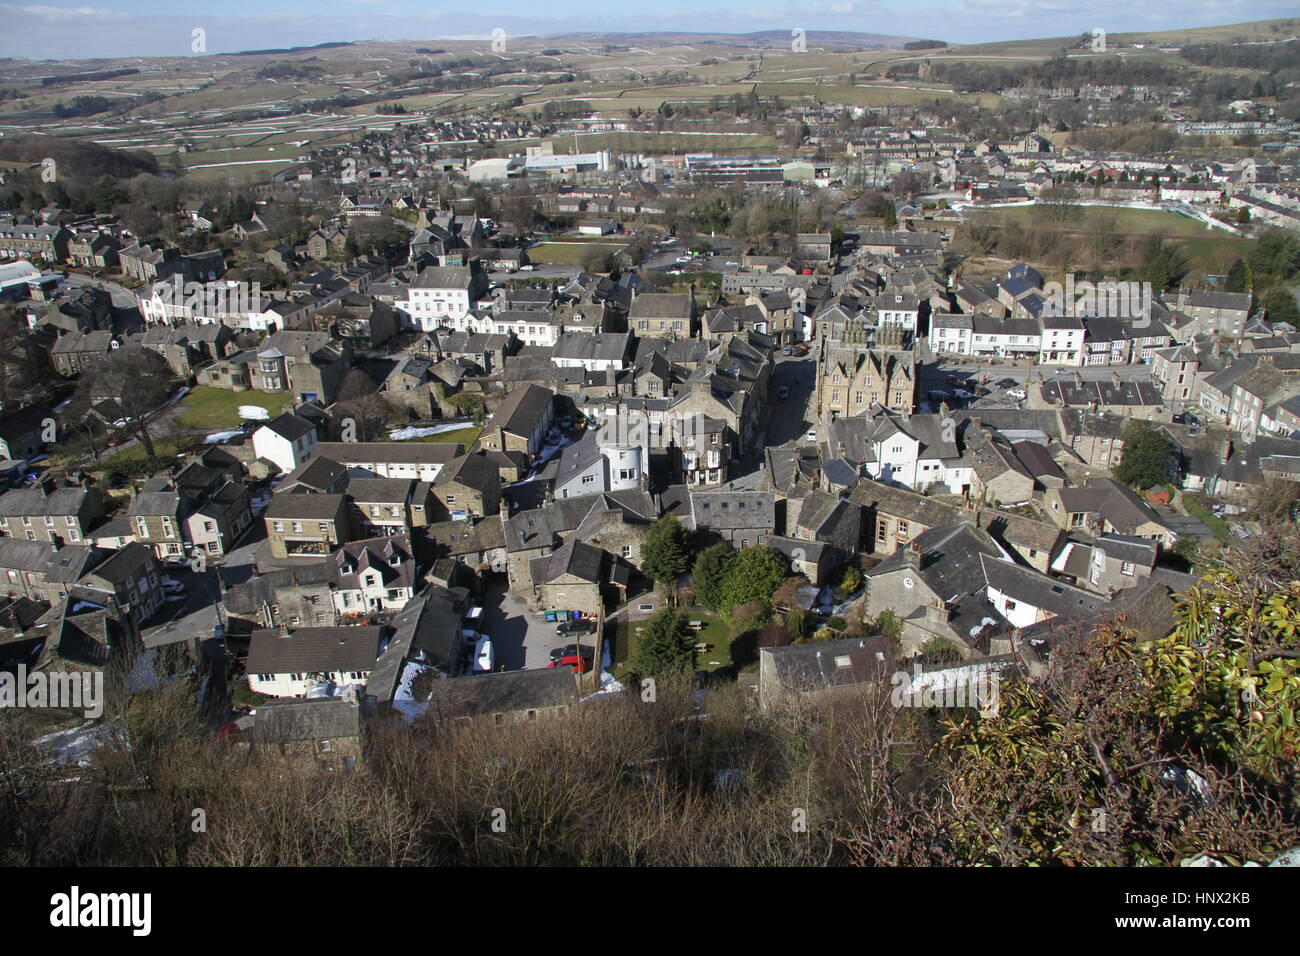 View of market place and town centre from the top of Castleberg Rock, Settle, North Yorkshire, UK Stock Photo